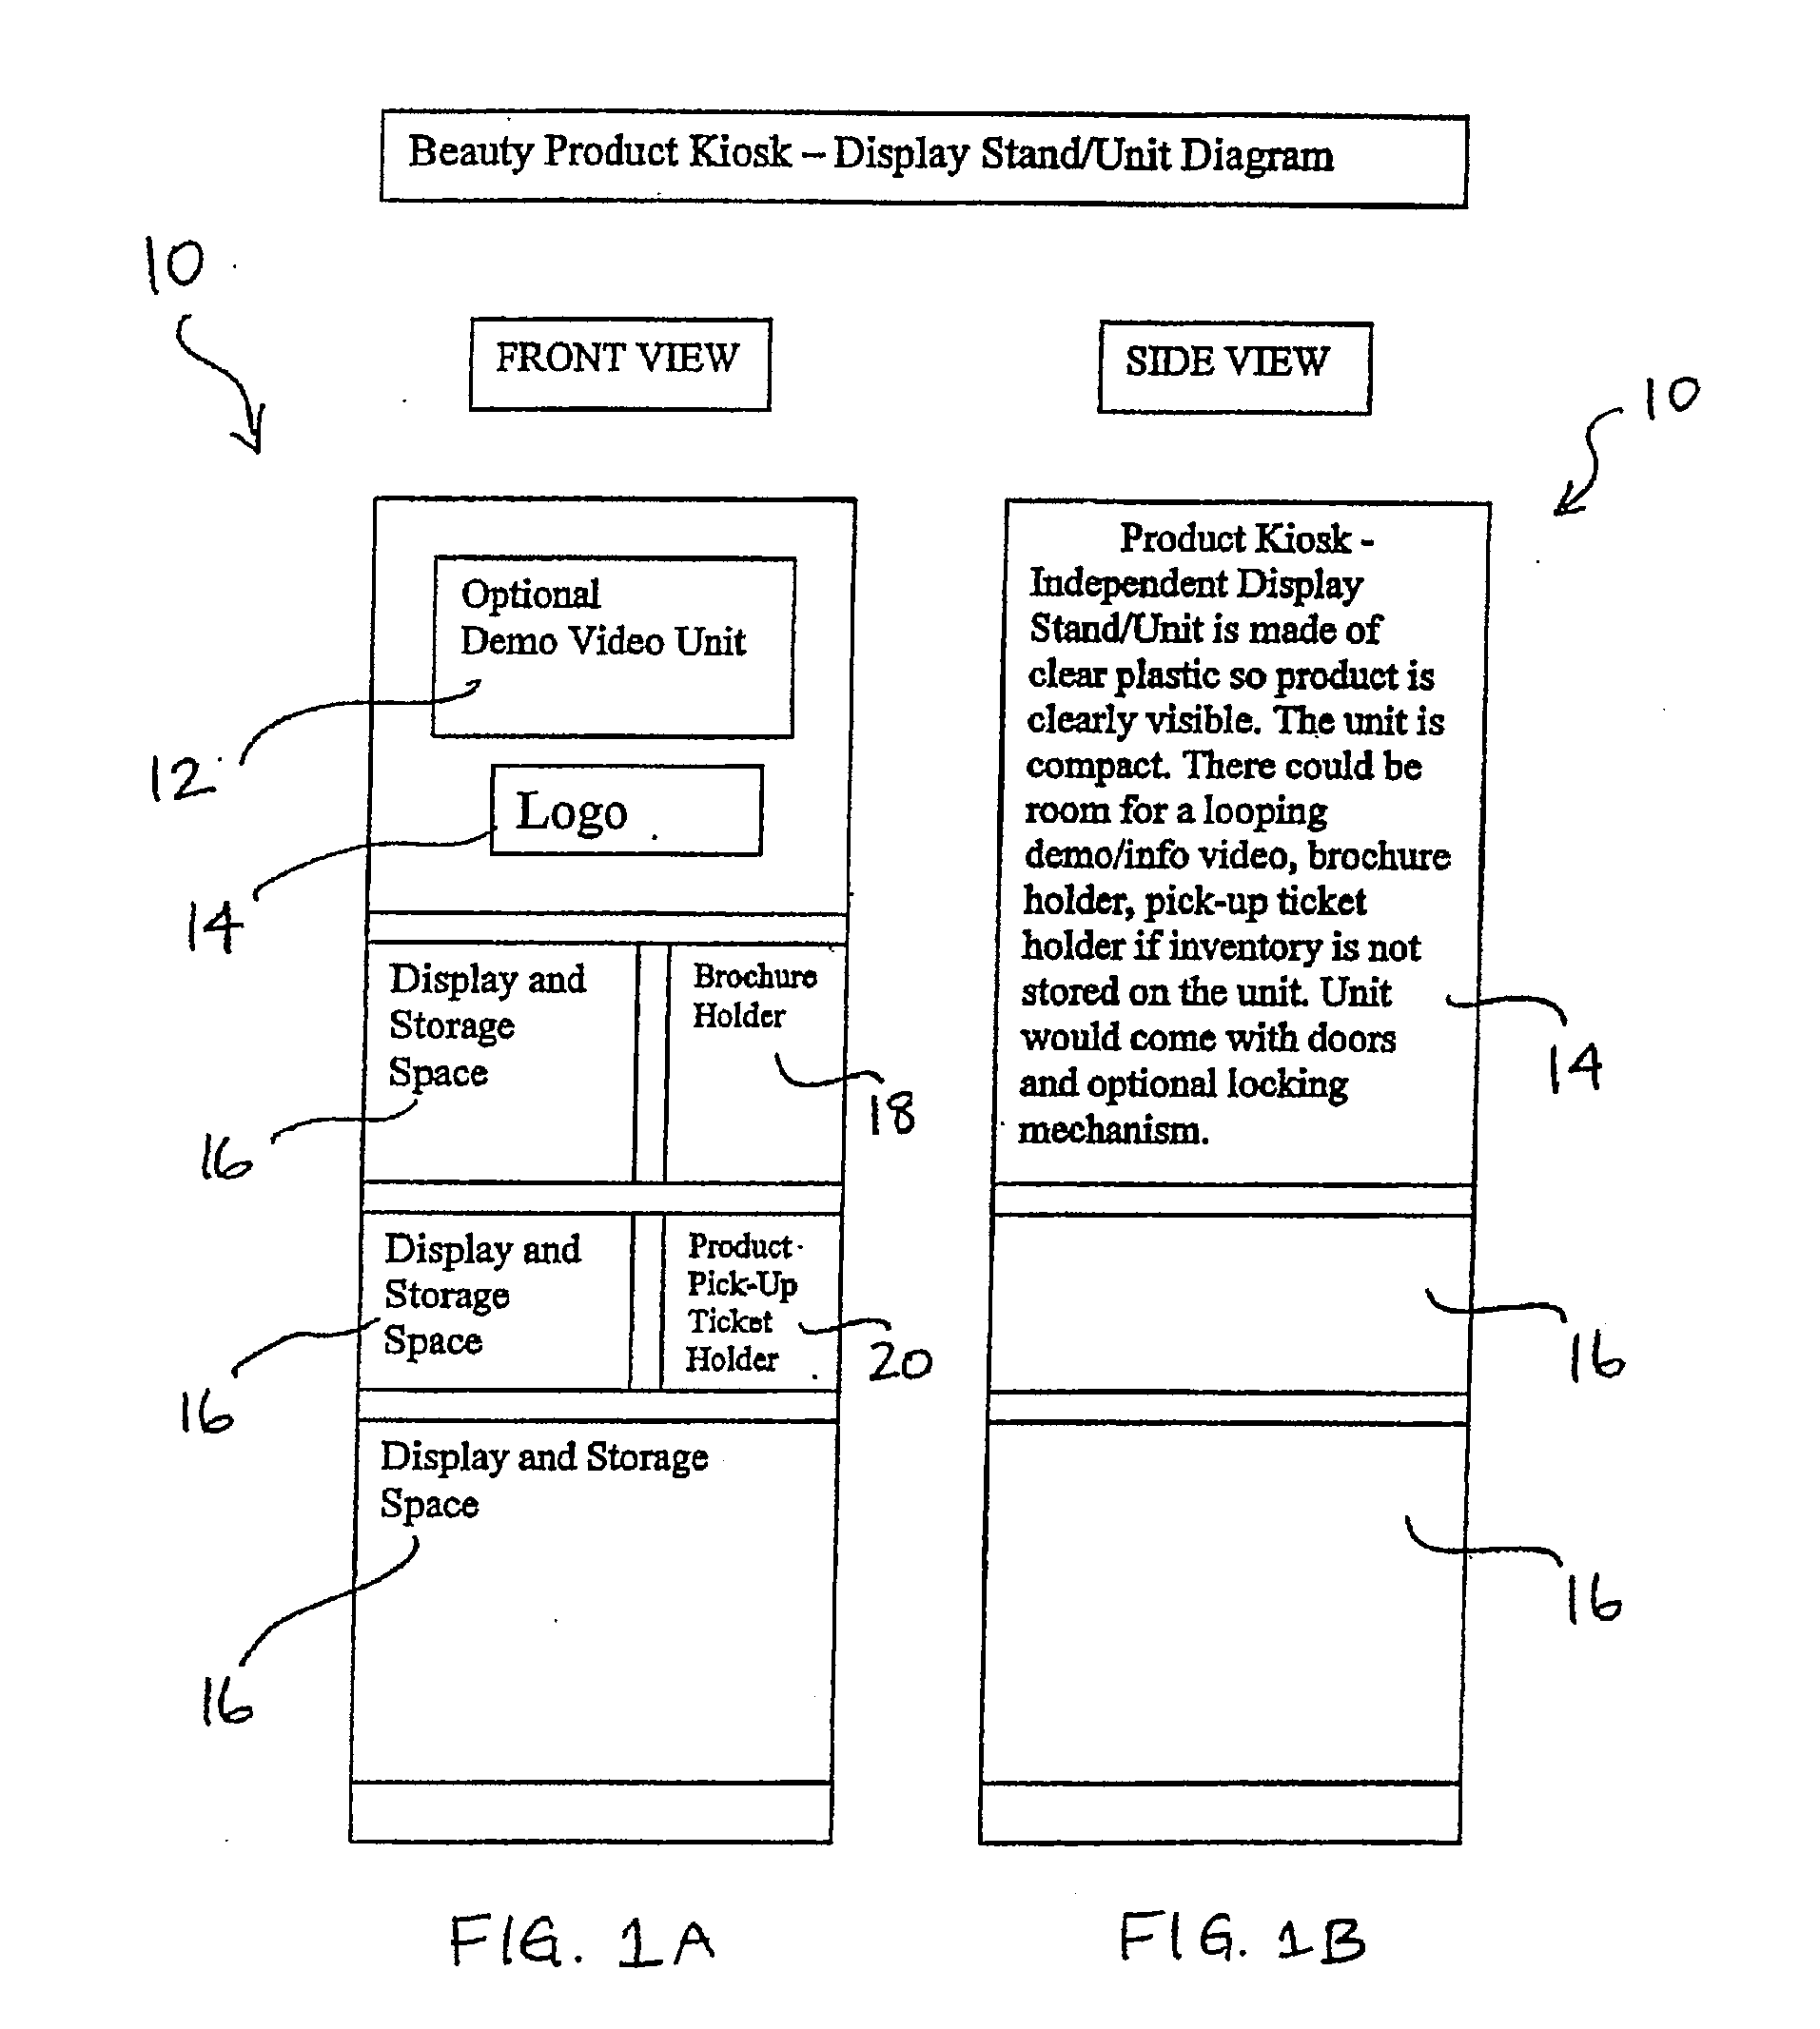 System and method of marketing beauty products